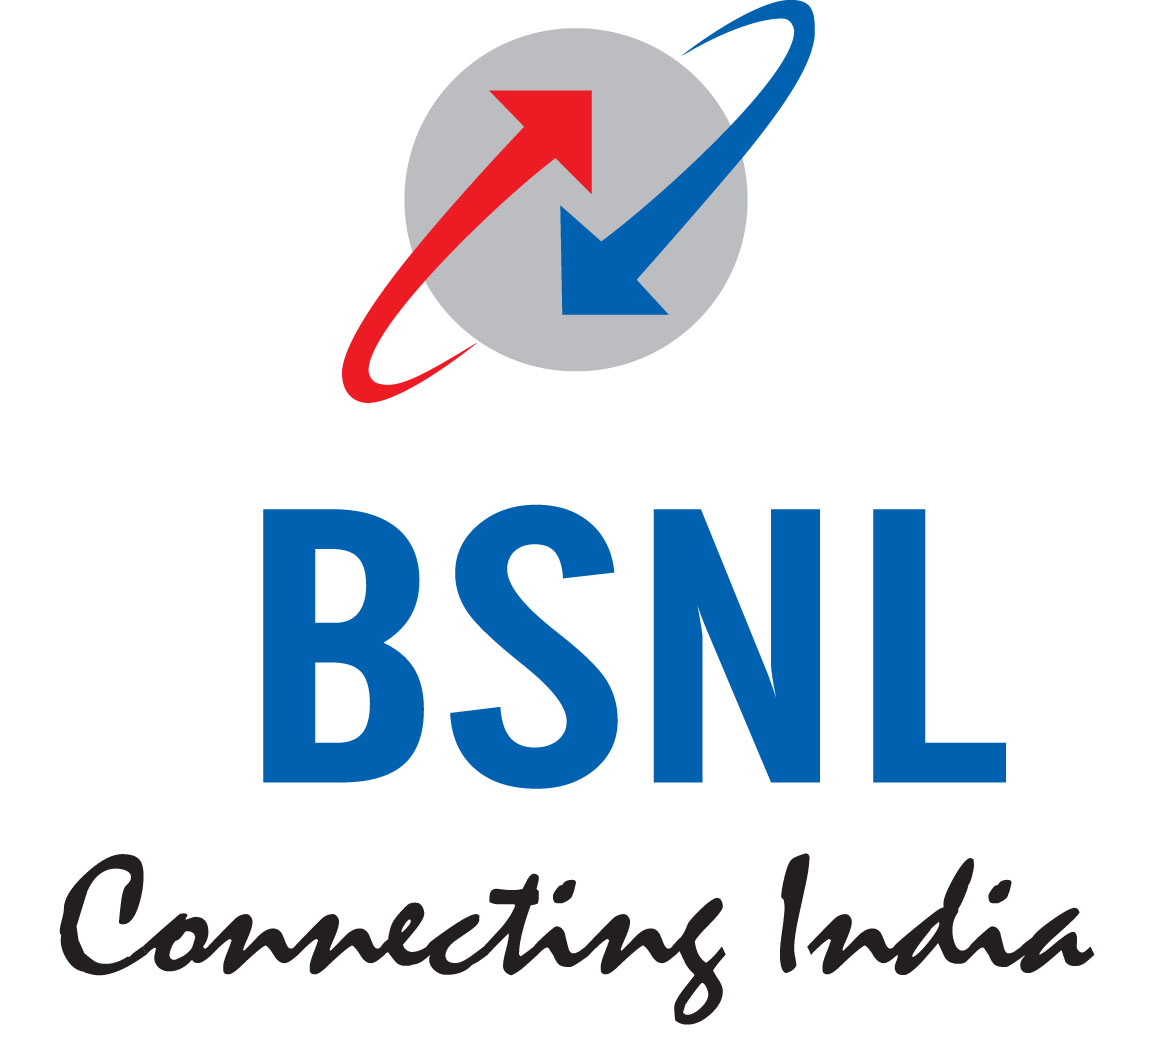 BSNL will offer free voice to compete with Reliance Jio